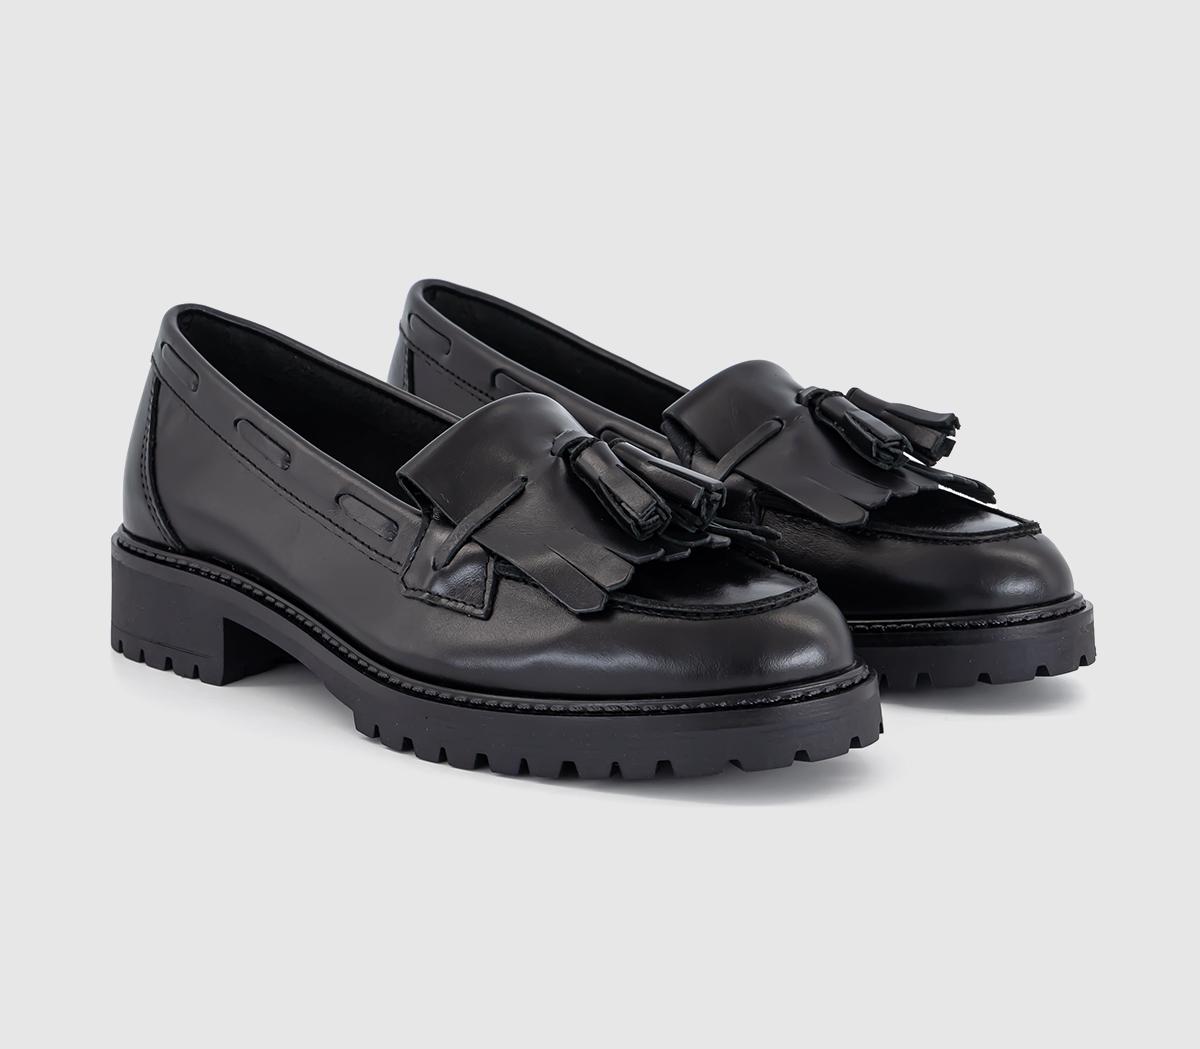 OFFICE Womens Frey Fringe Tassel Cleated Loafers Black Leather, 9